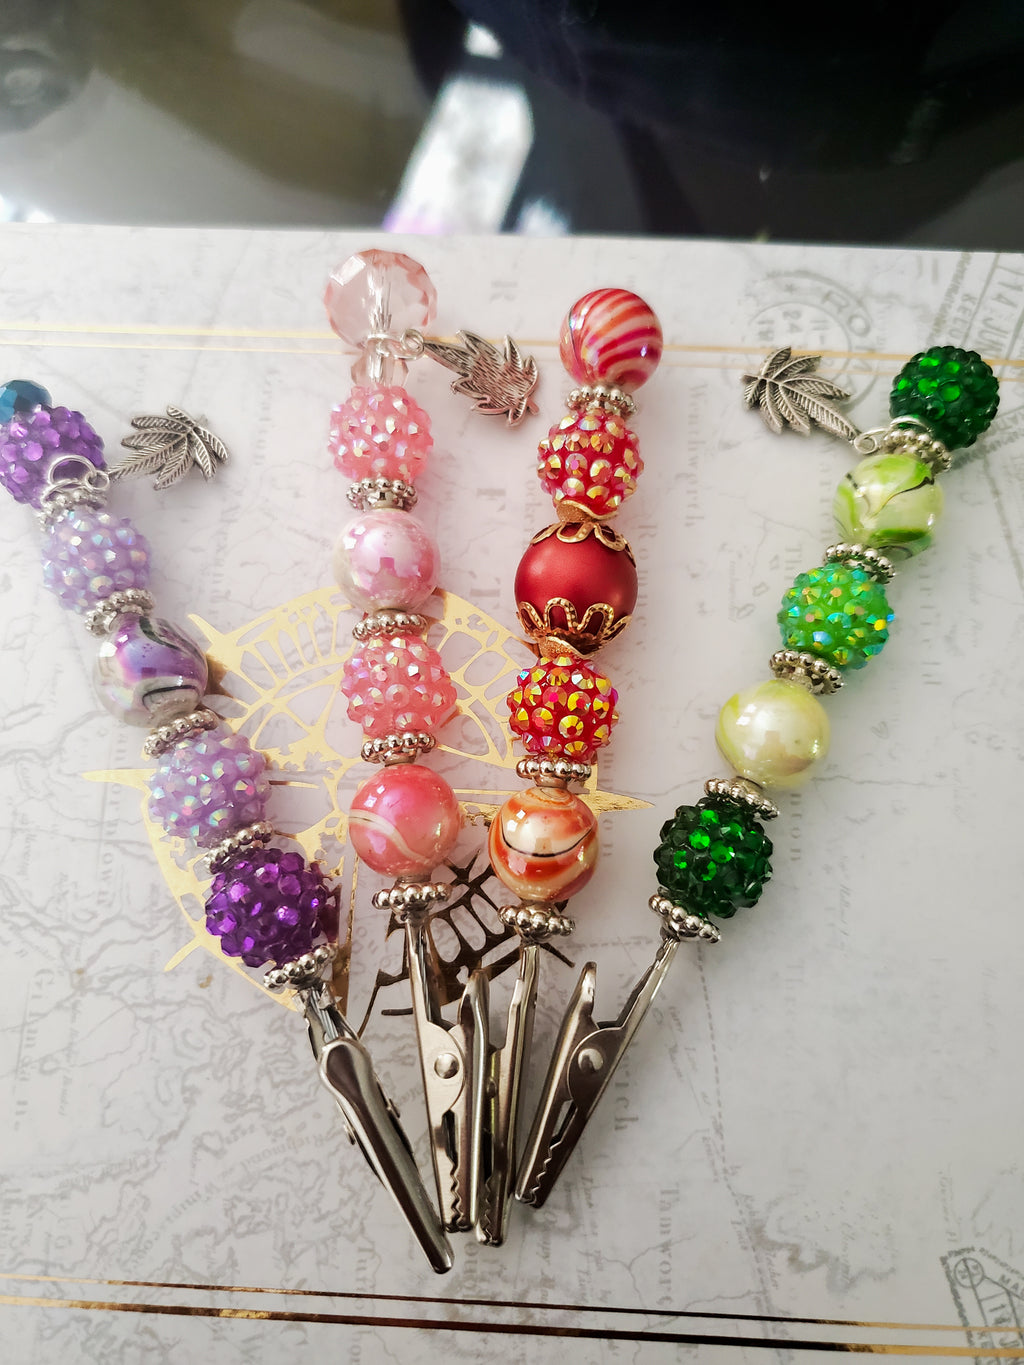 "Mood" Bedazzled Clips